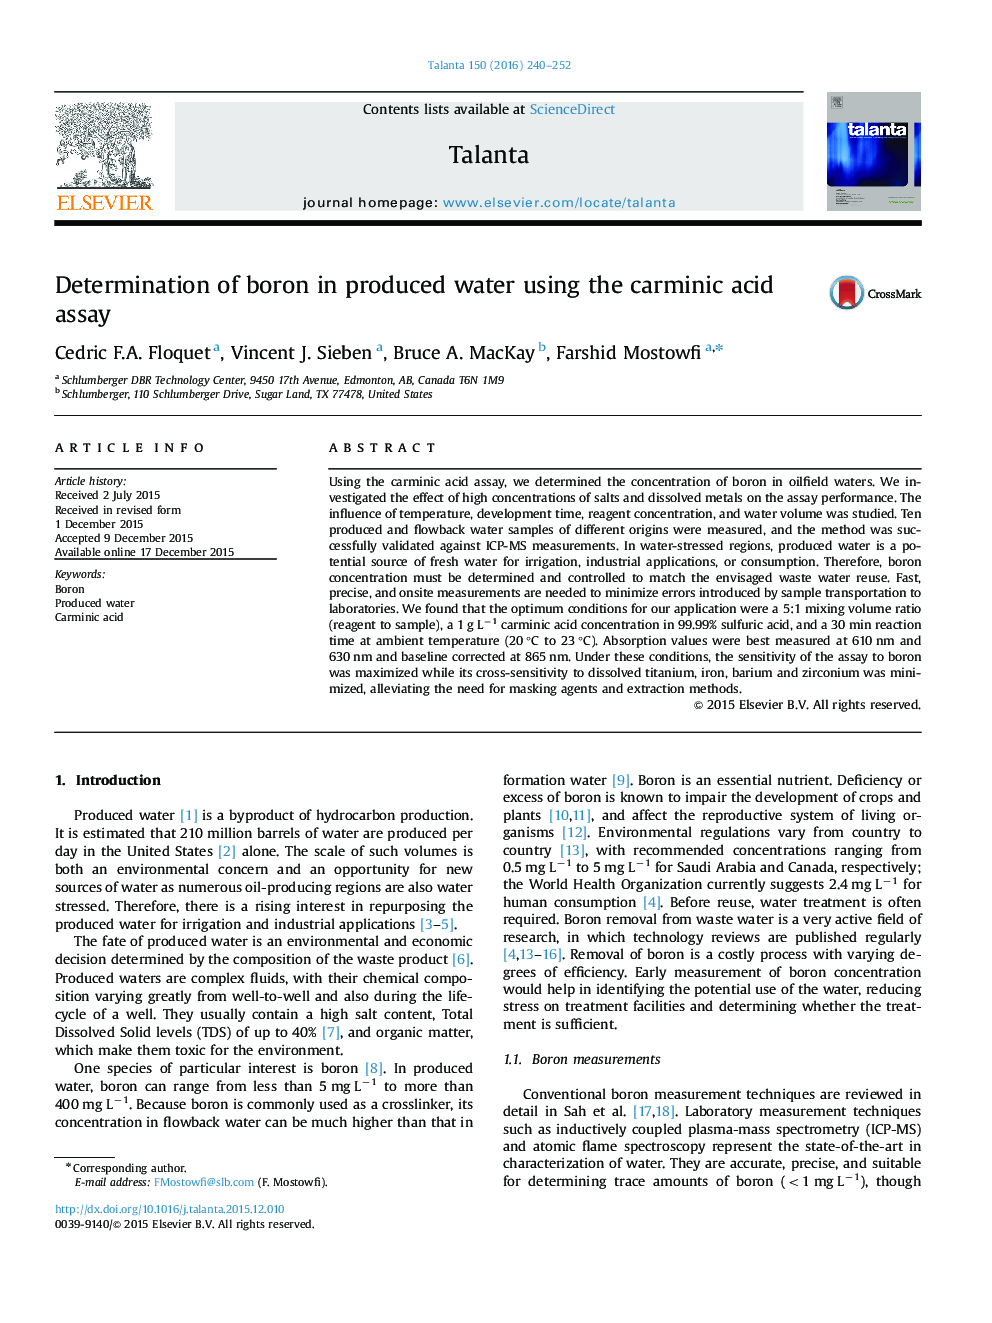 Determination of boron in produced water using the carminic acid assay